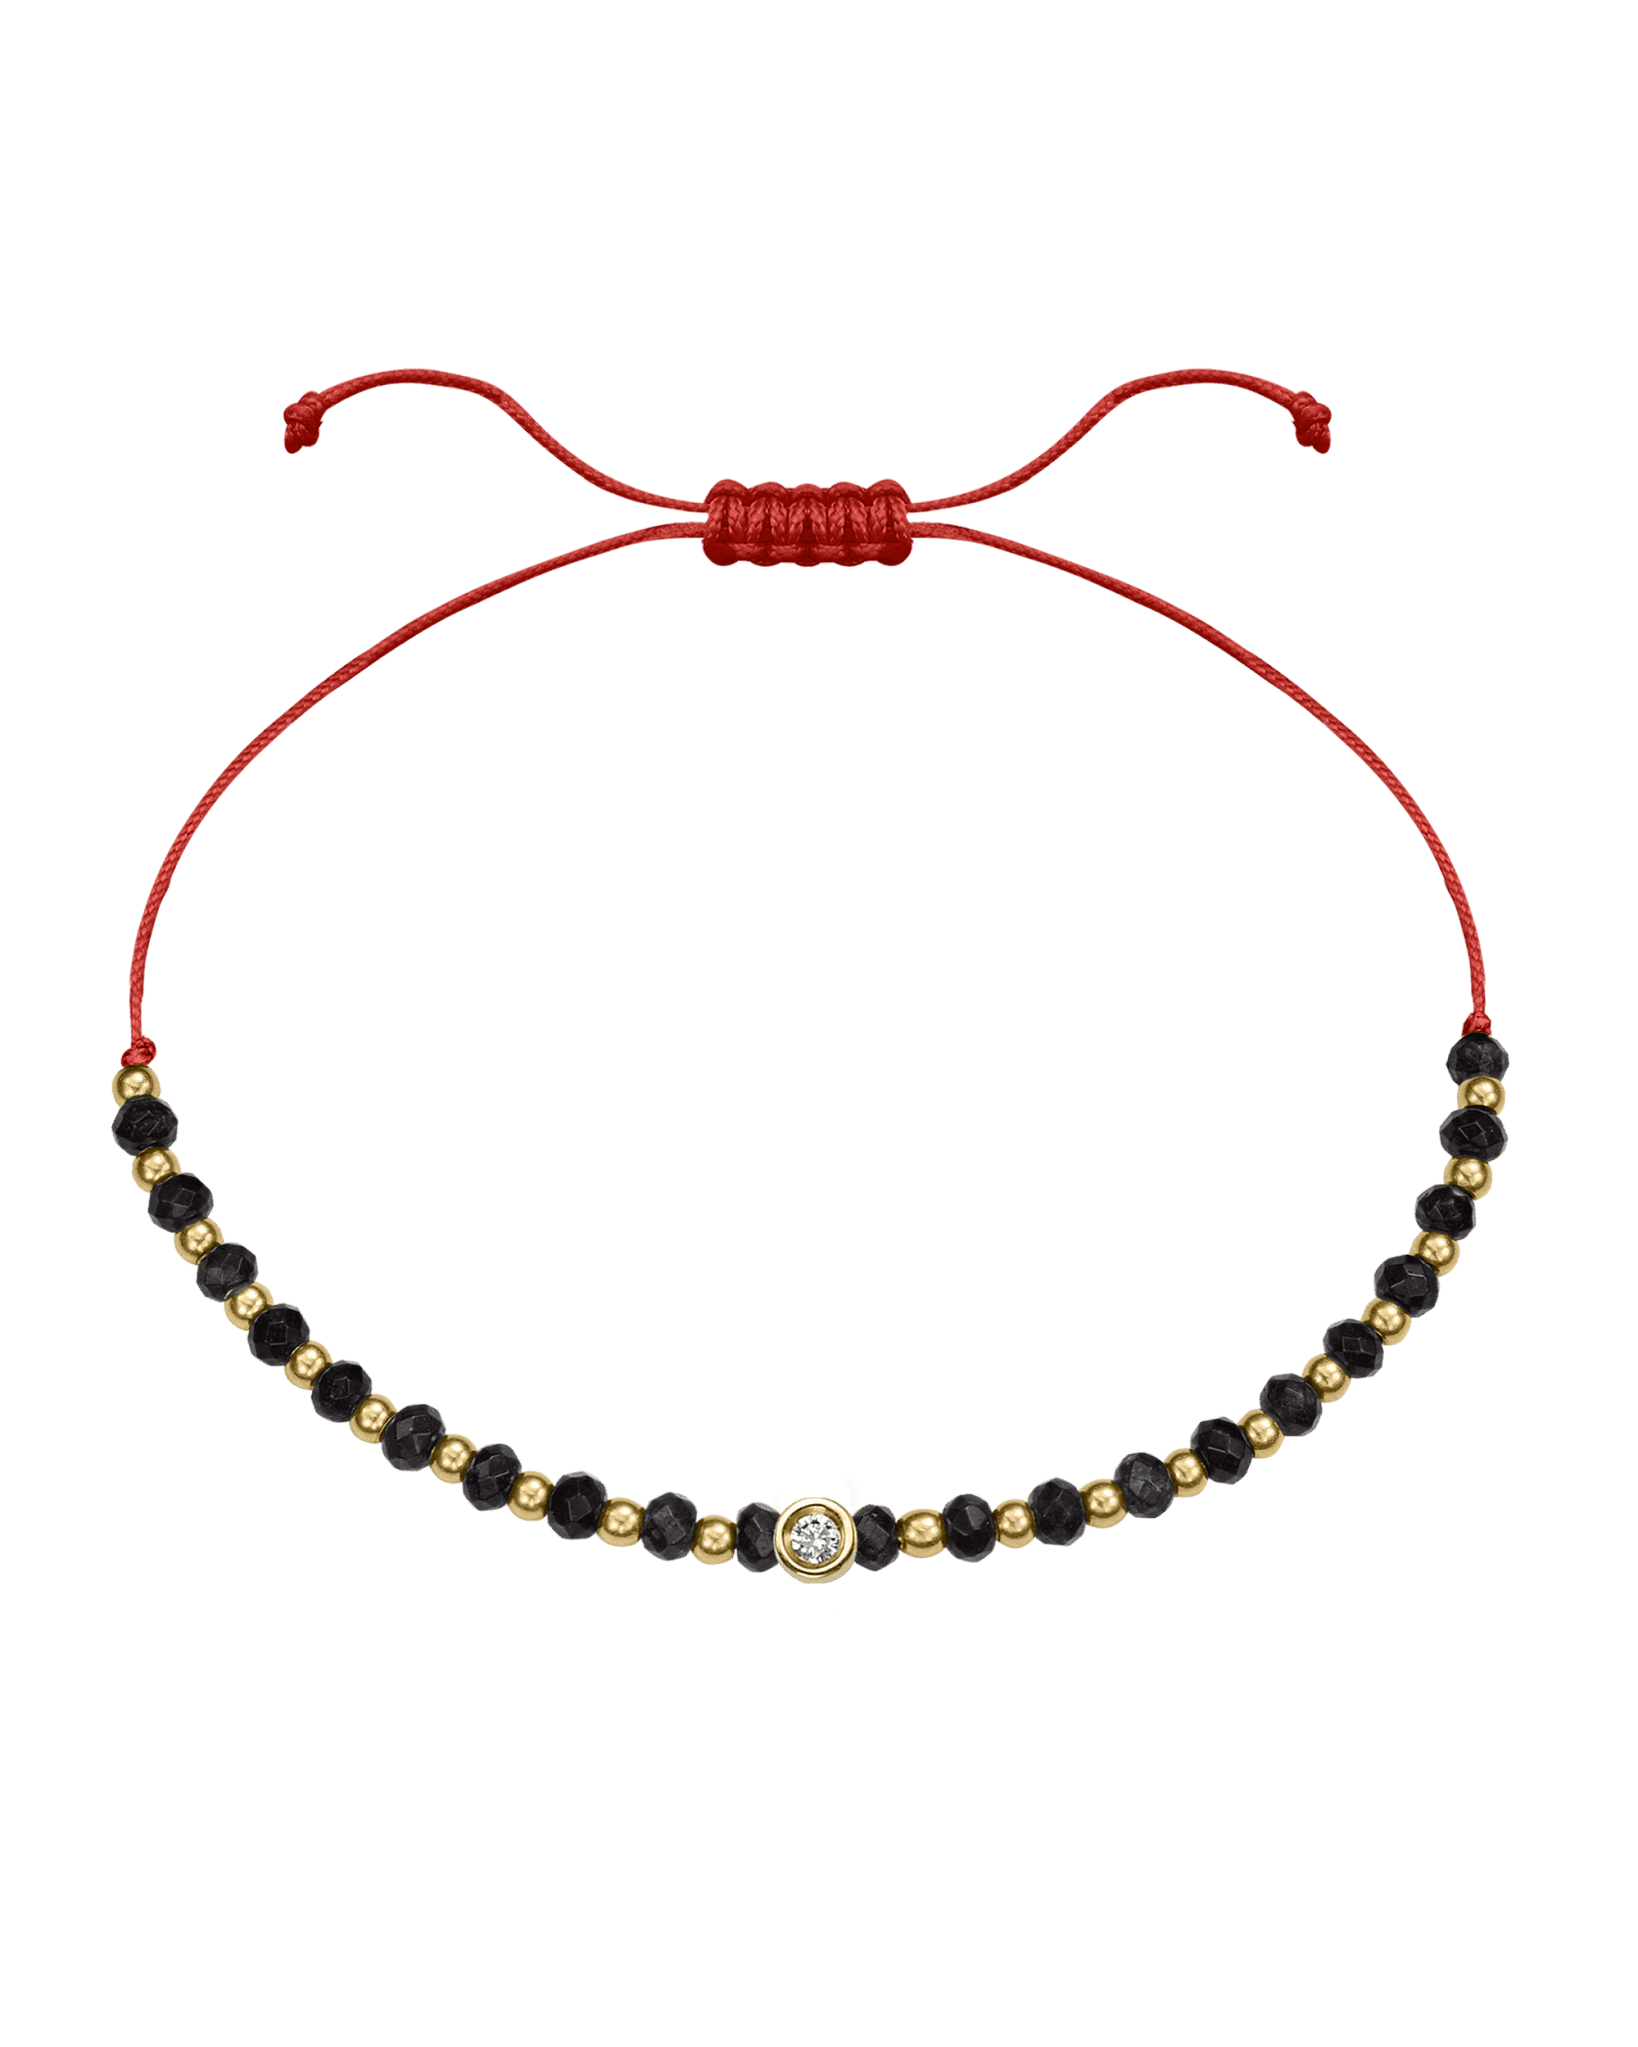 Black Onyx Gemstone String of Love Bracelet for Protection - 14K Yellow Gold Bracelets 14K Solid Gold Red Small: 0.03ct 